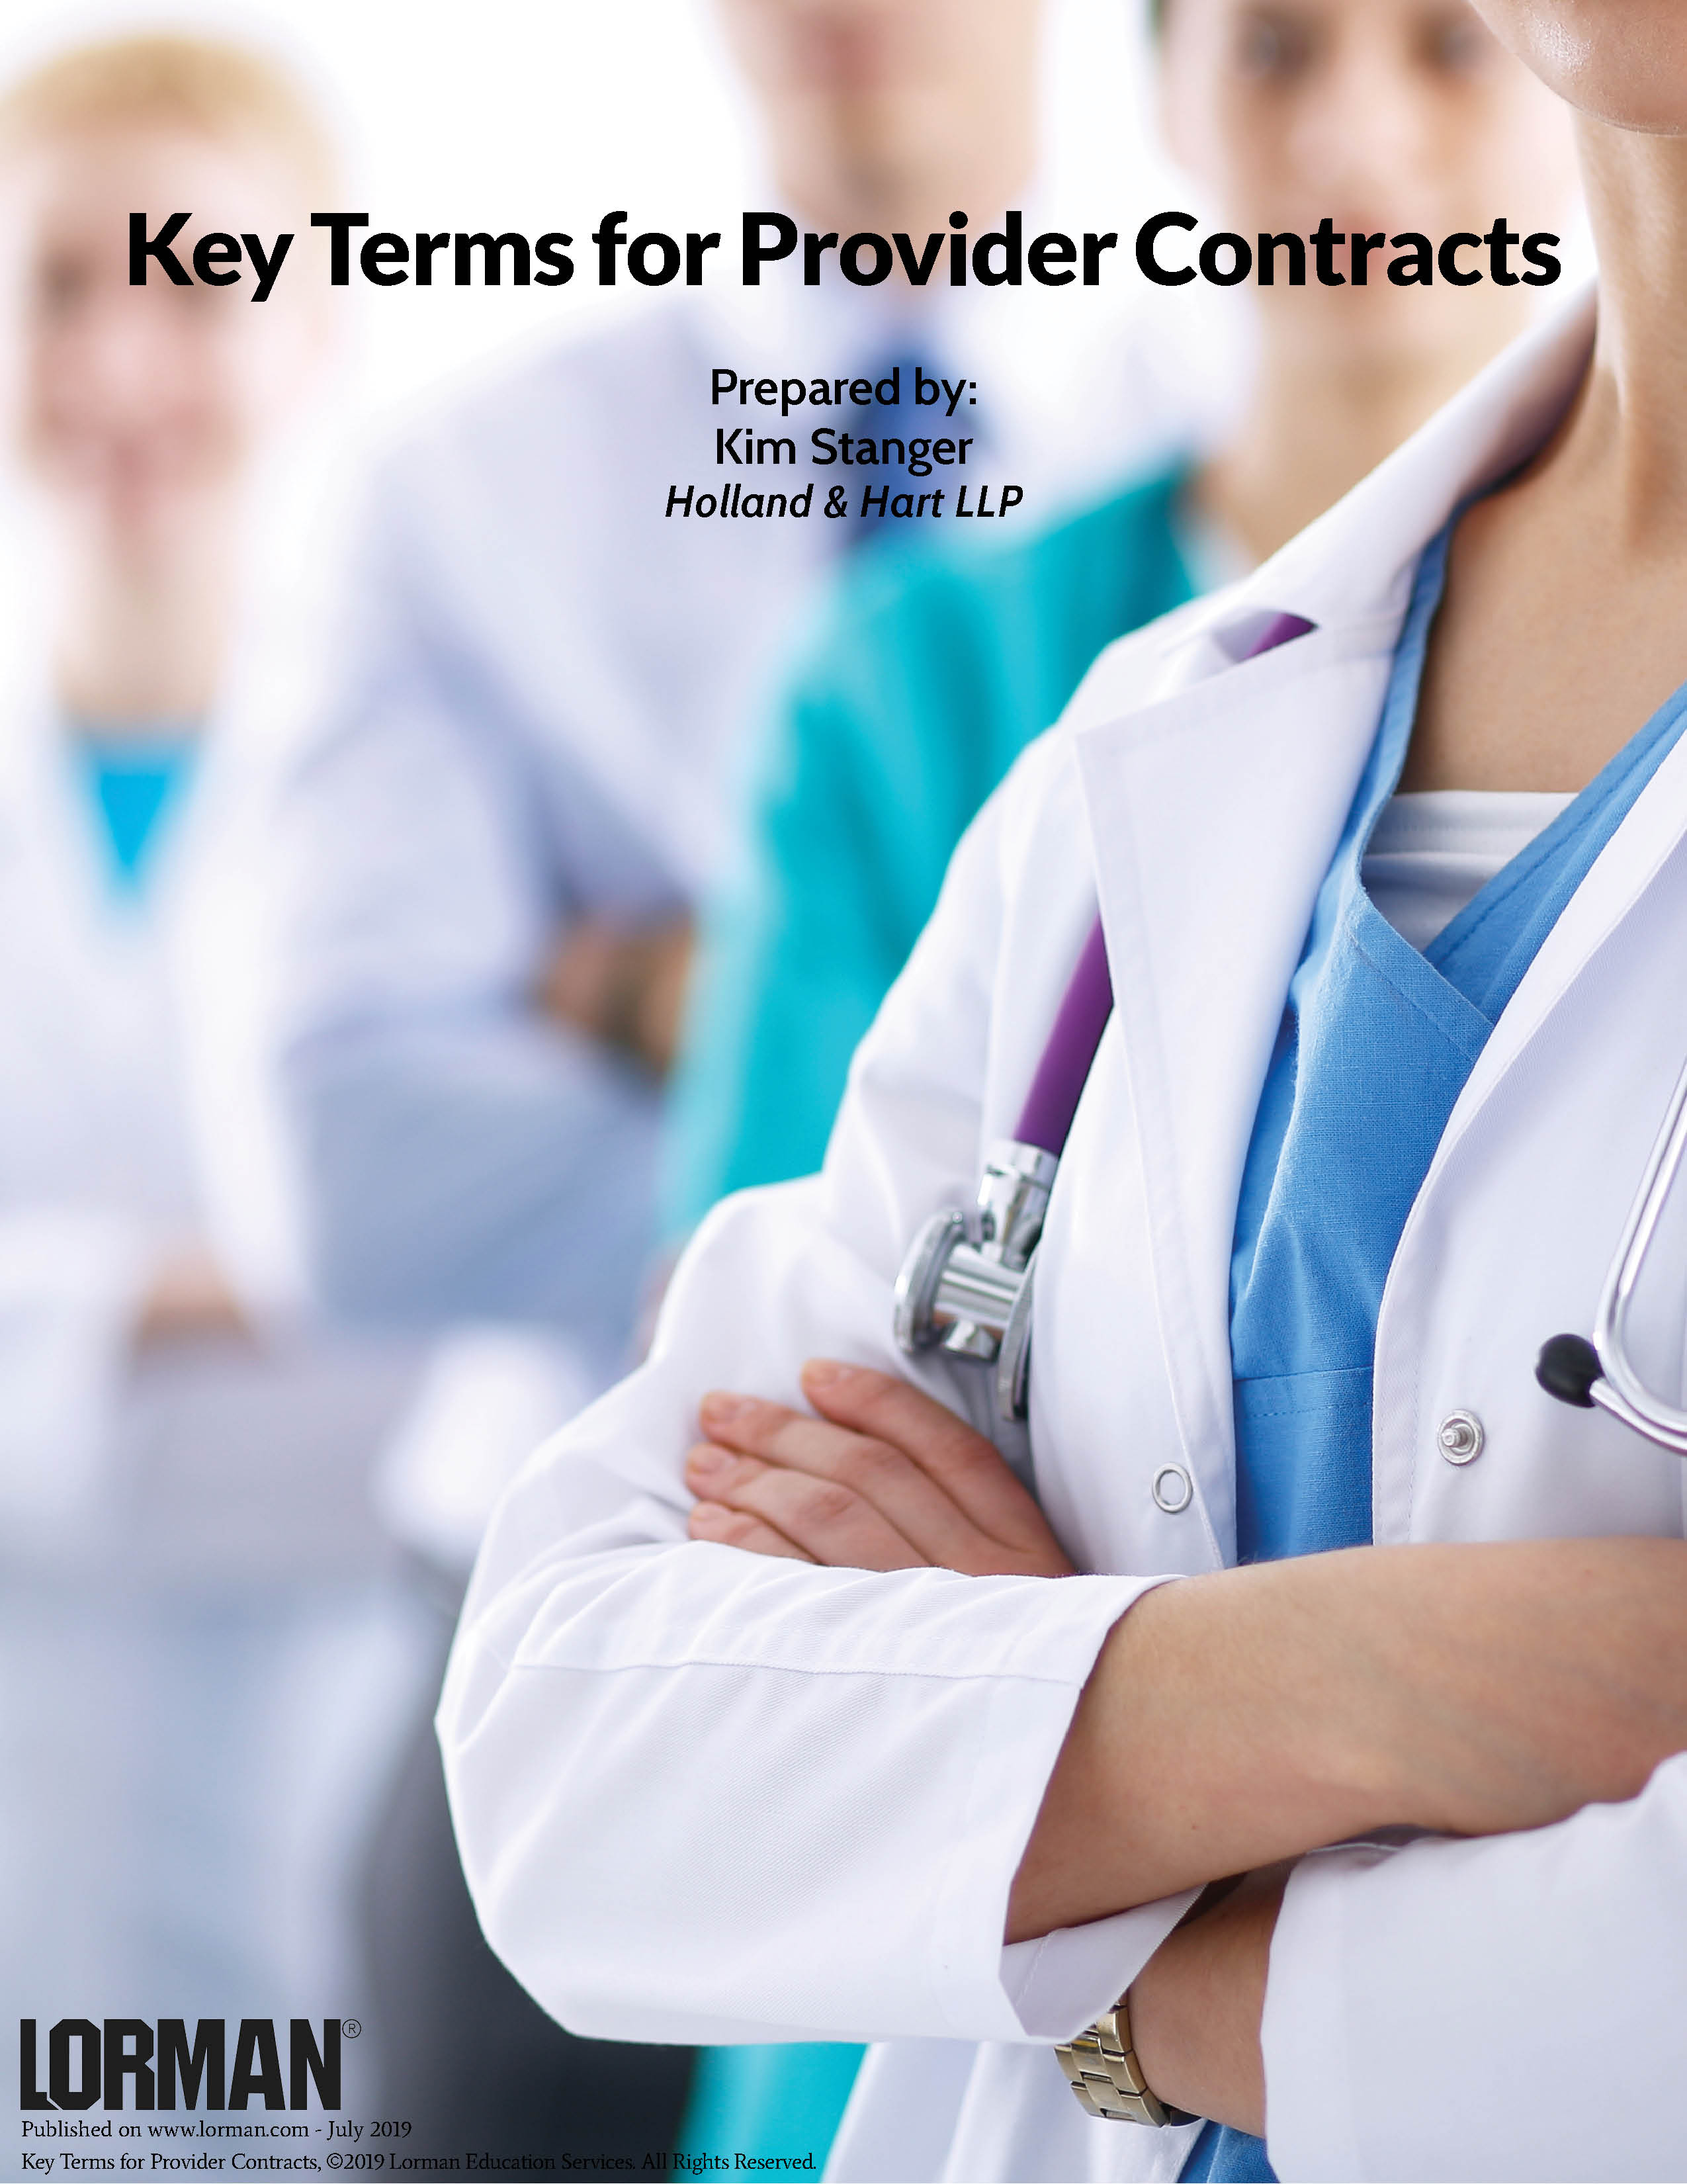 Key Terms for Provider Contracts